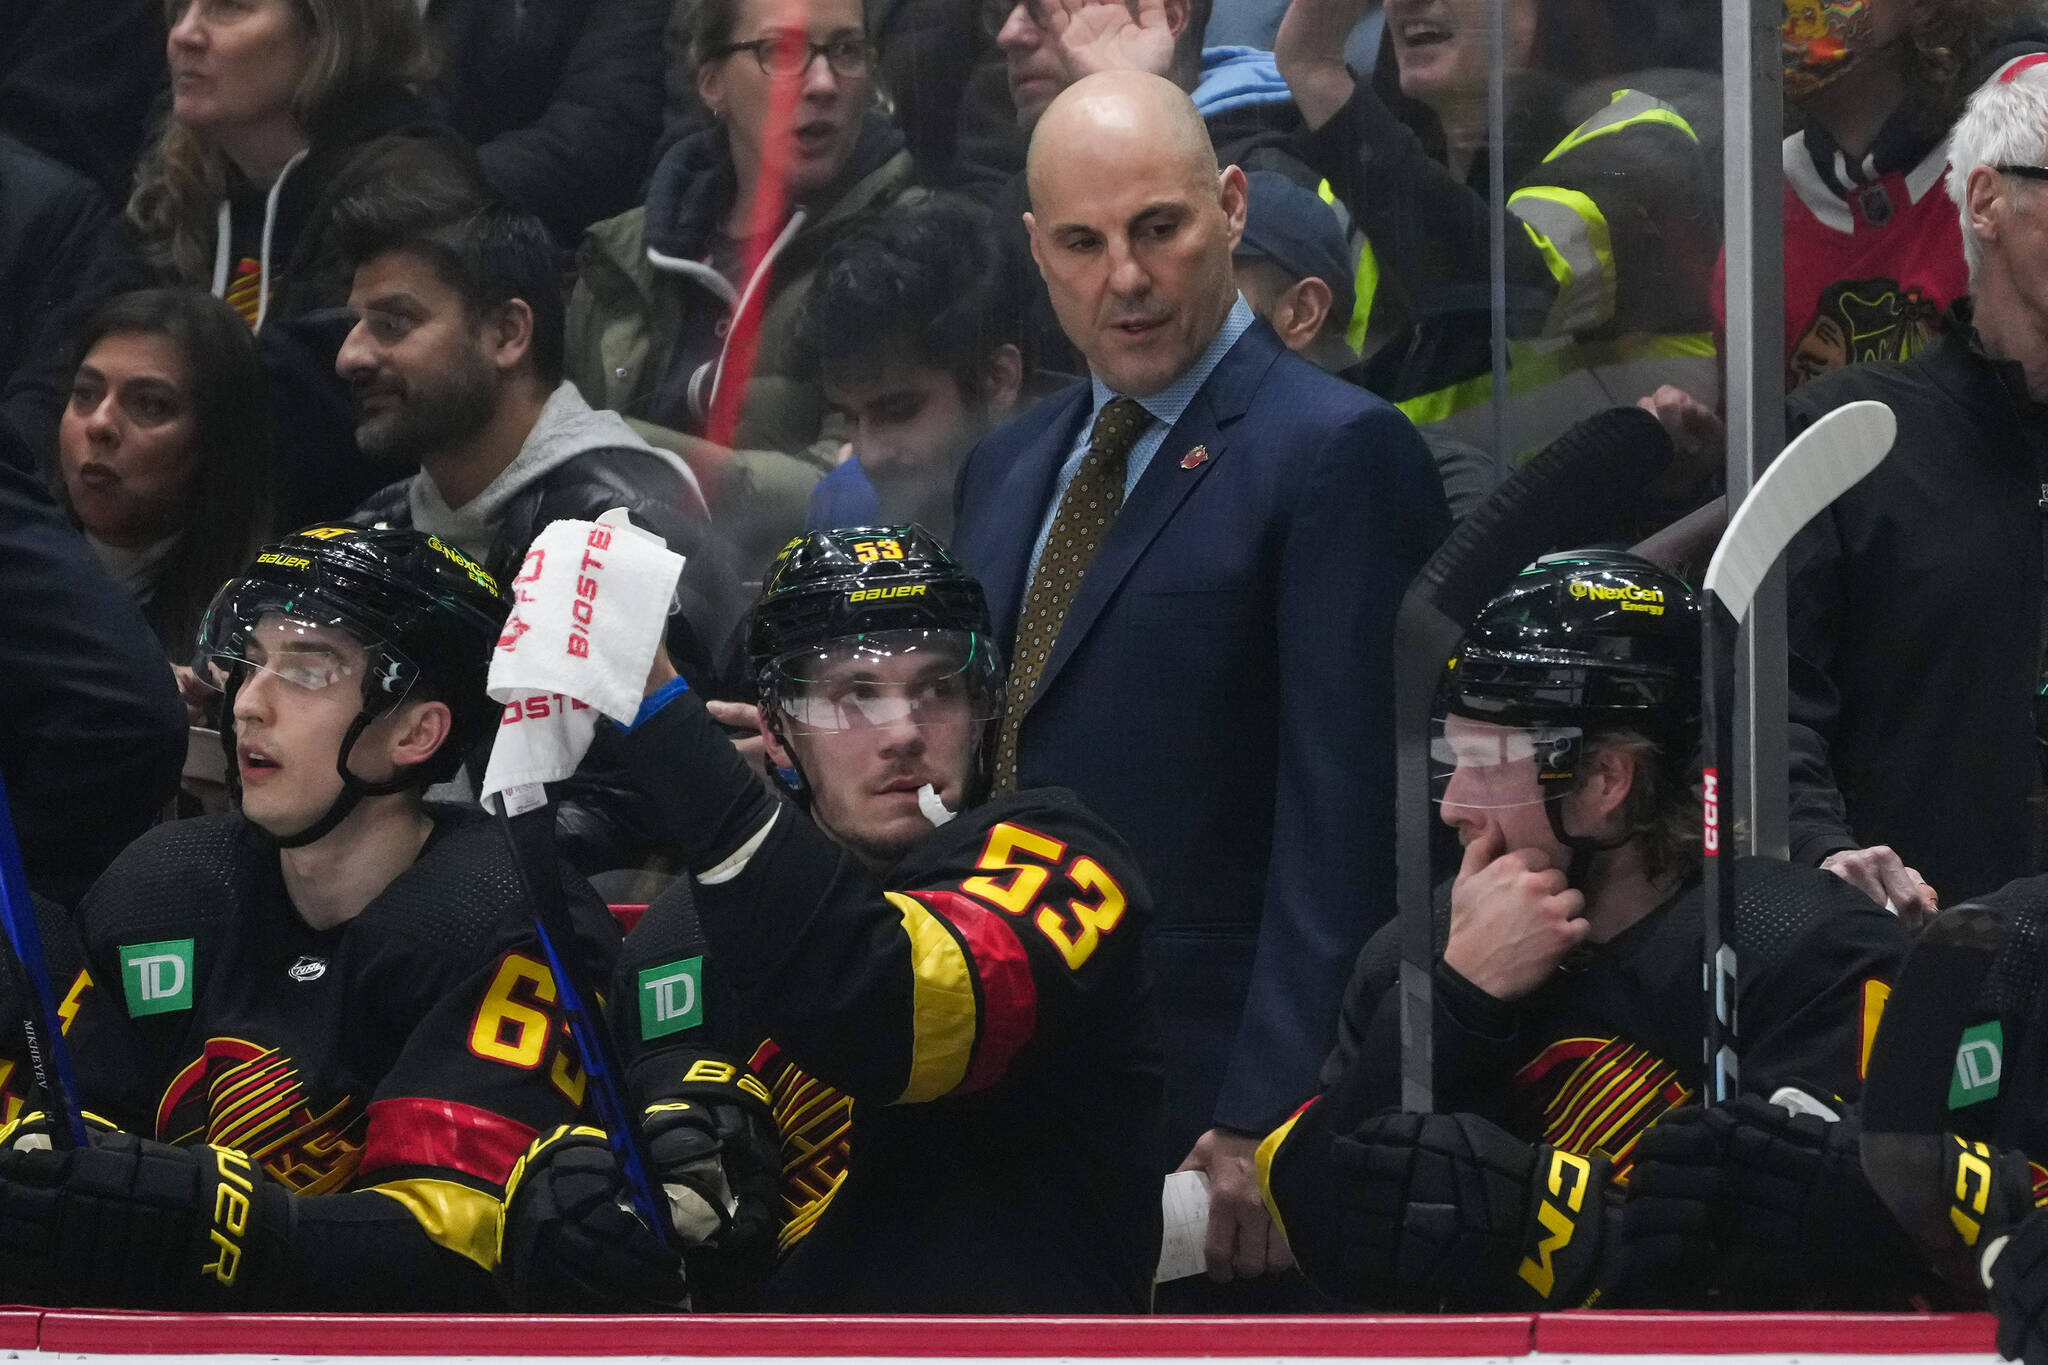 Vancouver Canucks head coach Rick Tocchet, back, stands behind Ilya Mikheyev, from left to right, Bo Horvat and Brock Boeser during the first period of an NHL hockey game against the Chicago Blackhawks in Vancouver, on Tuesday, January 24, 2023. THE CANADIAN PRESS/Darryl Dyck